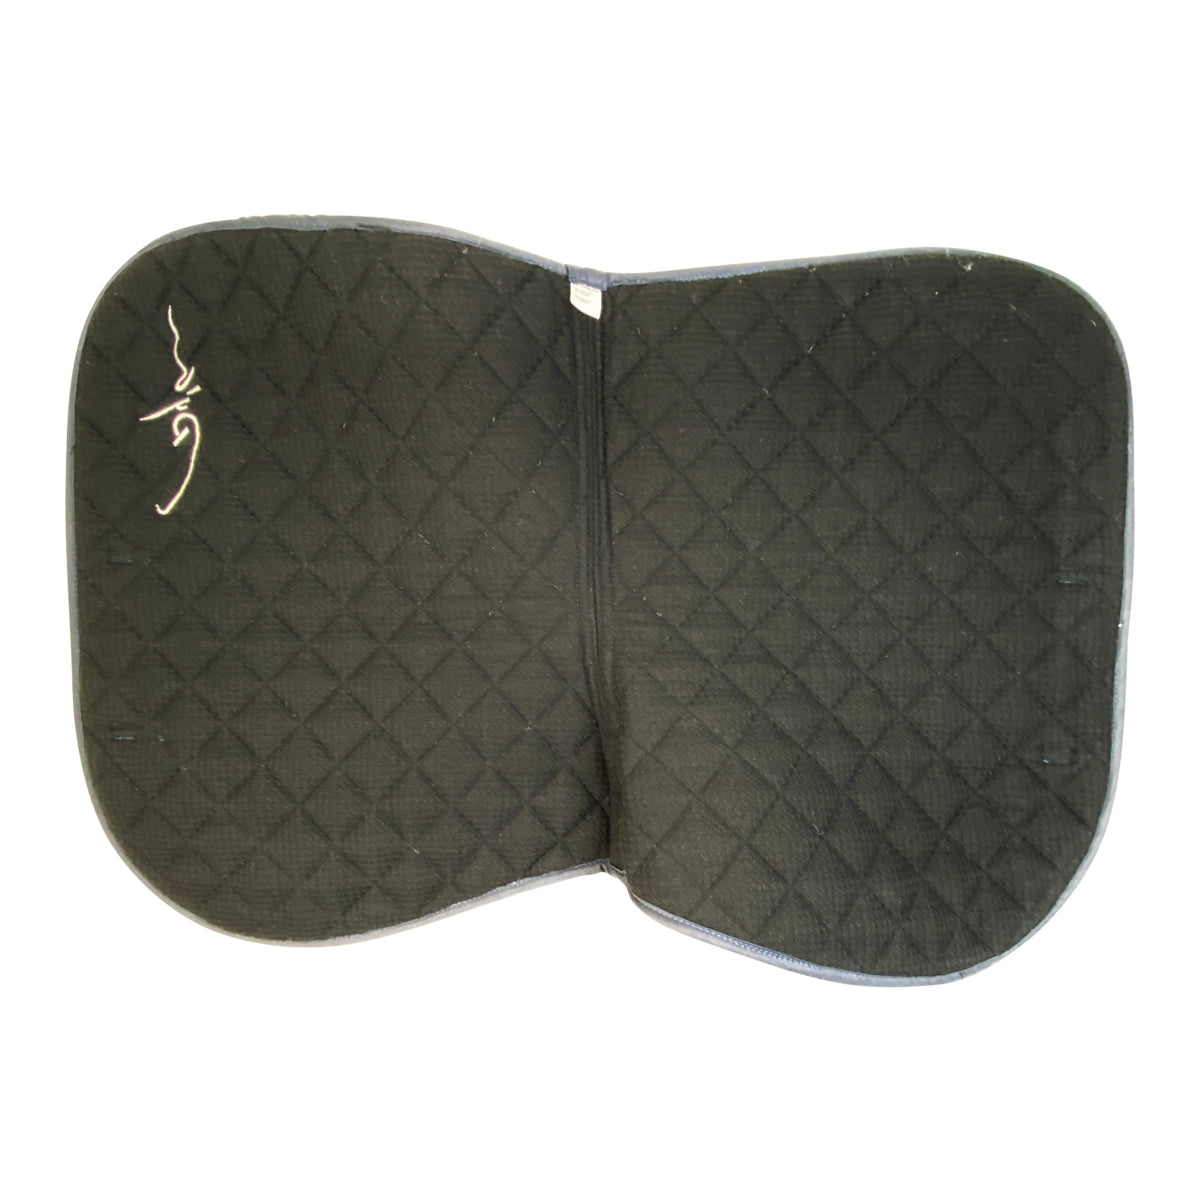 Dy'on Saddle Pad in Navy